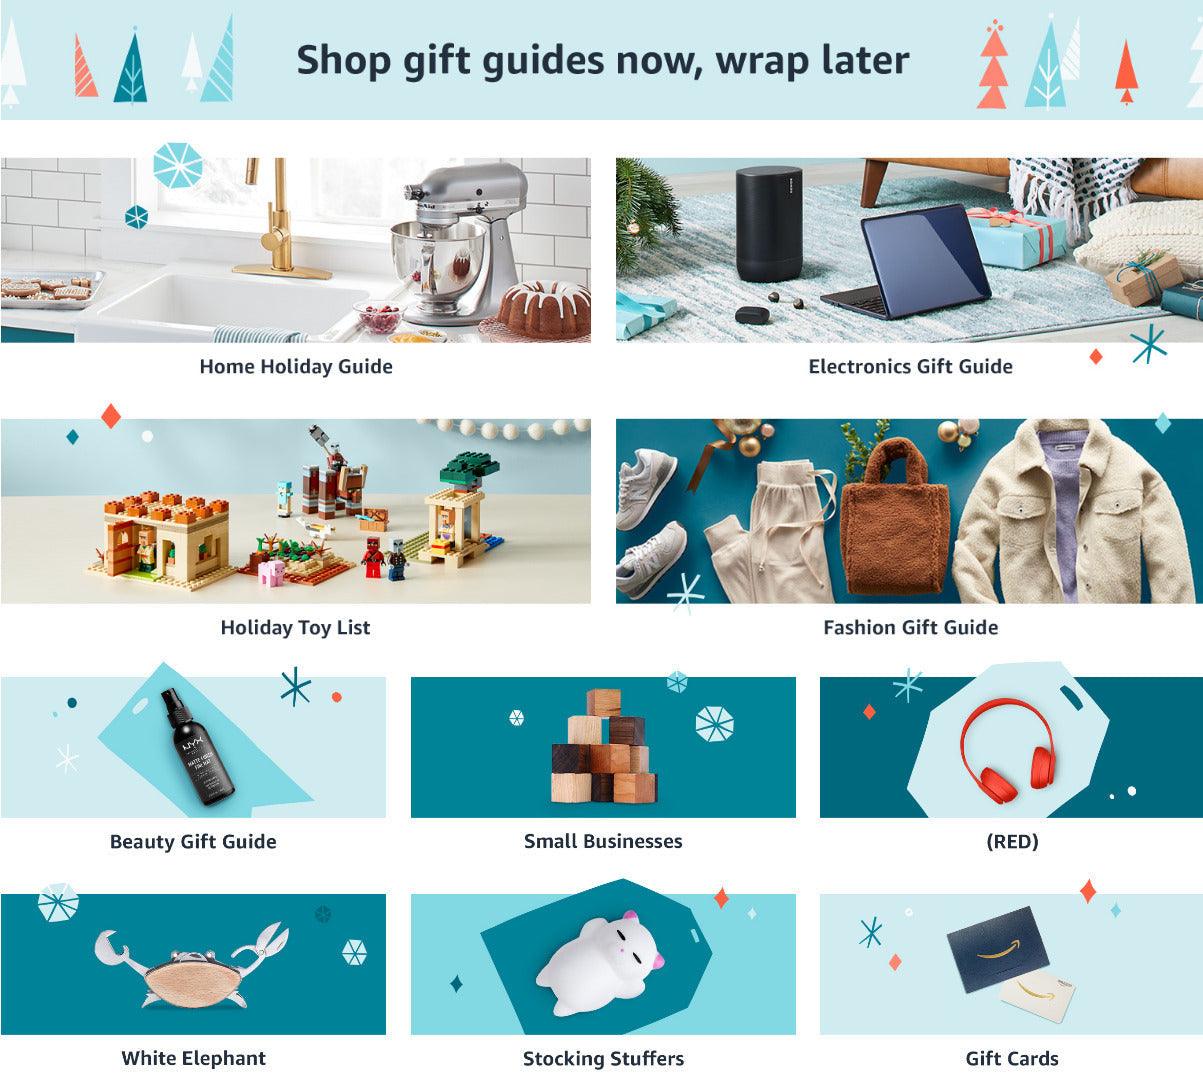 Shop Gifts for Everyone - The Amazon 2020 Holiday Guide Part 3 - 4aKid